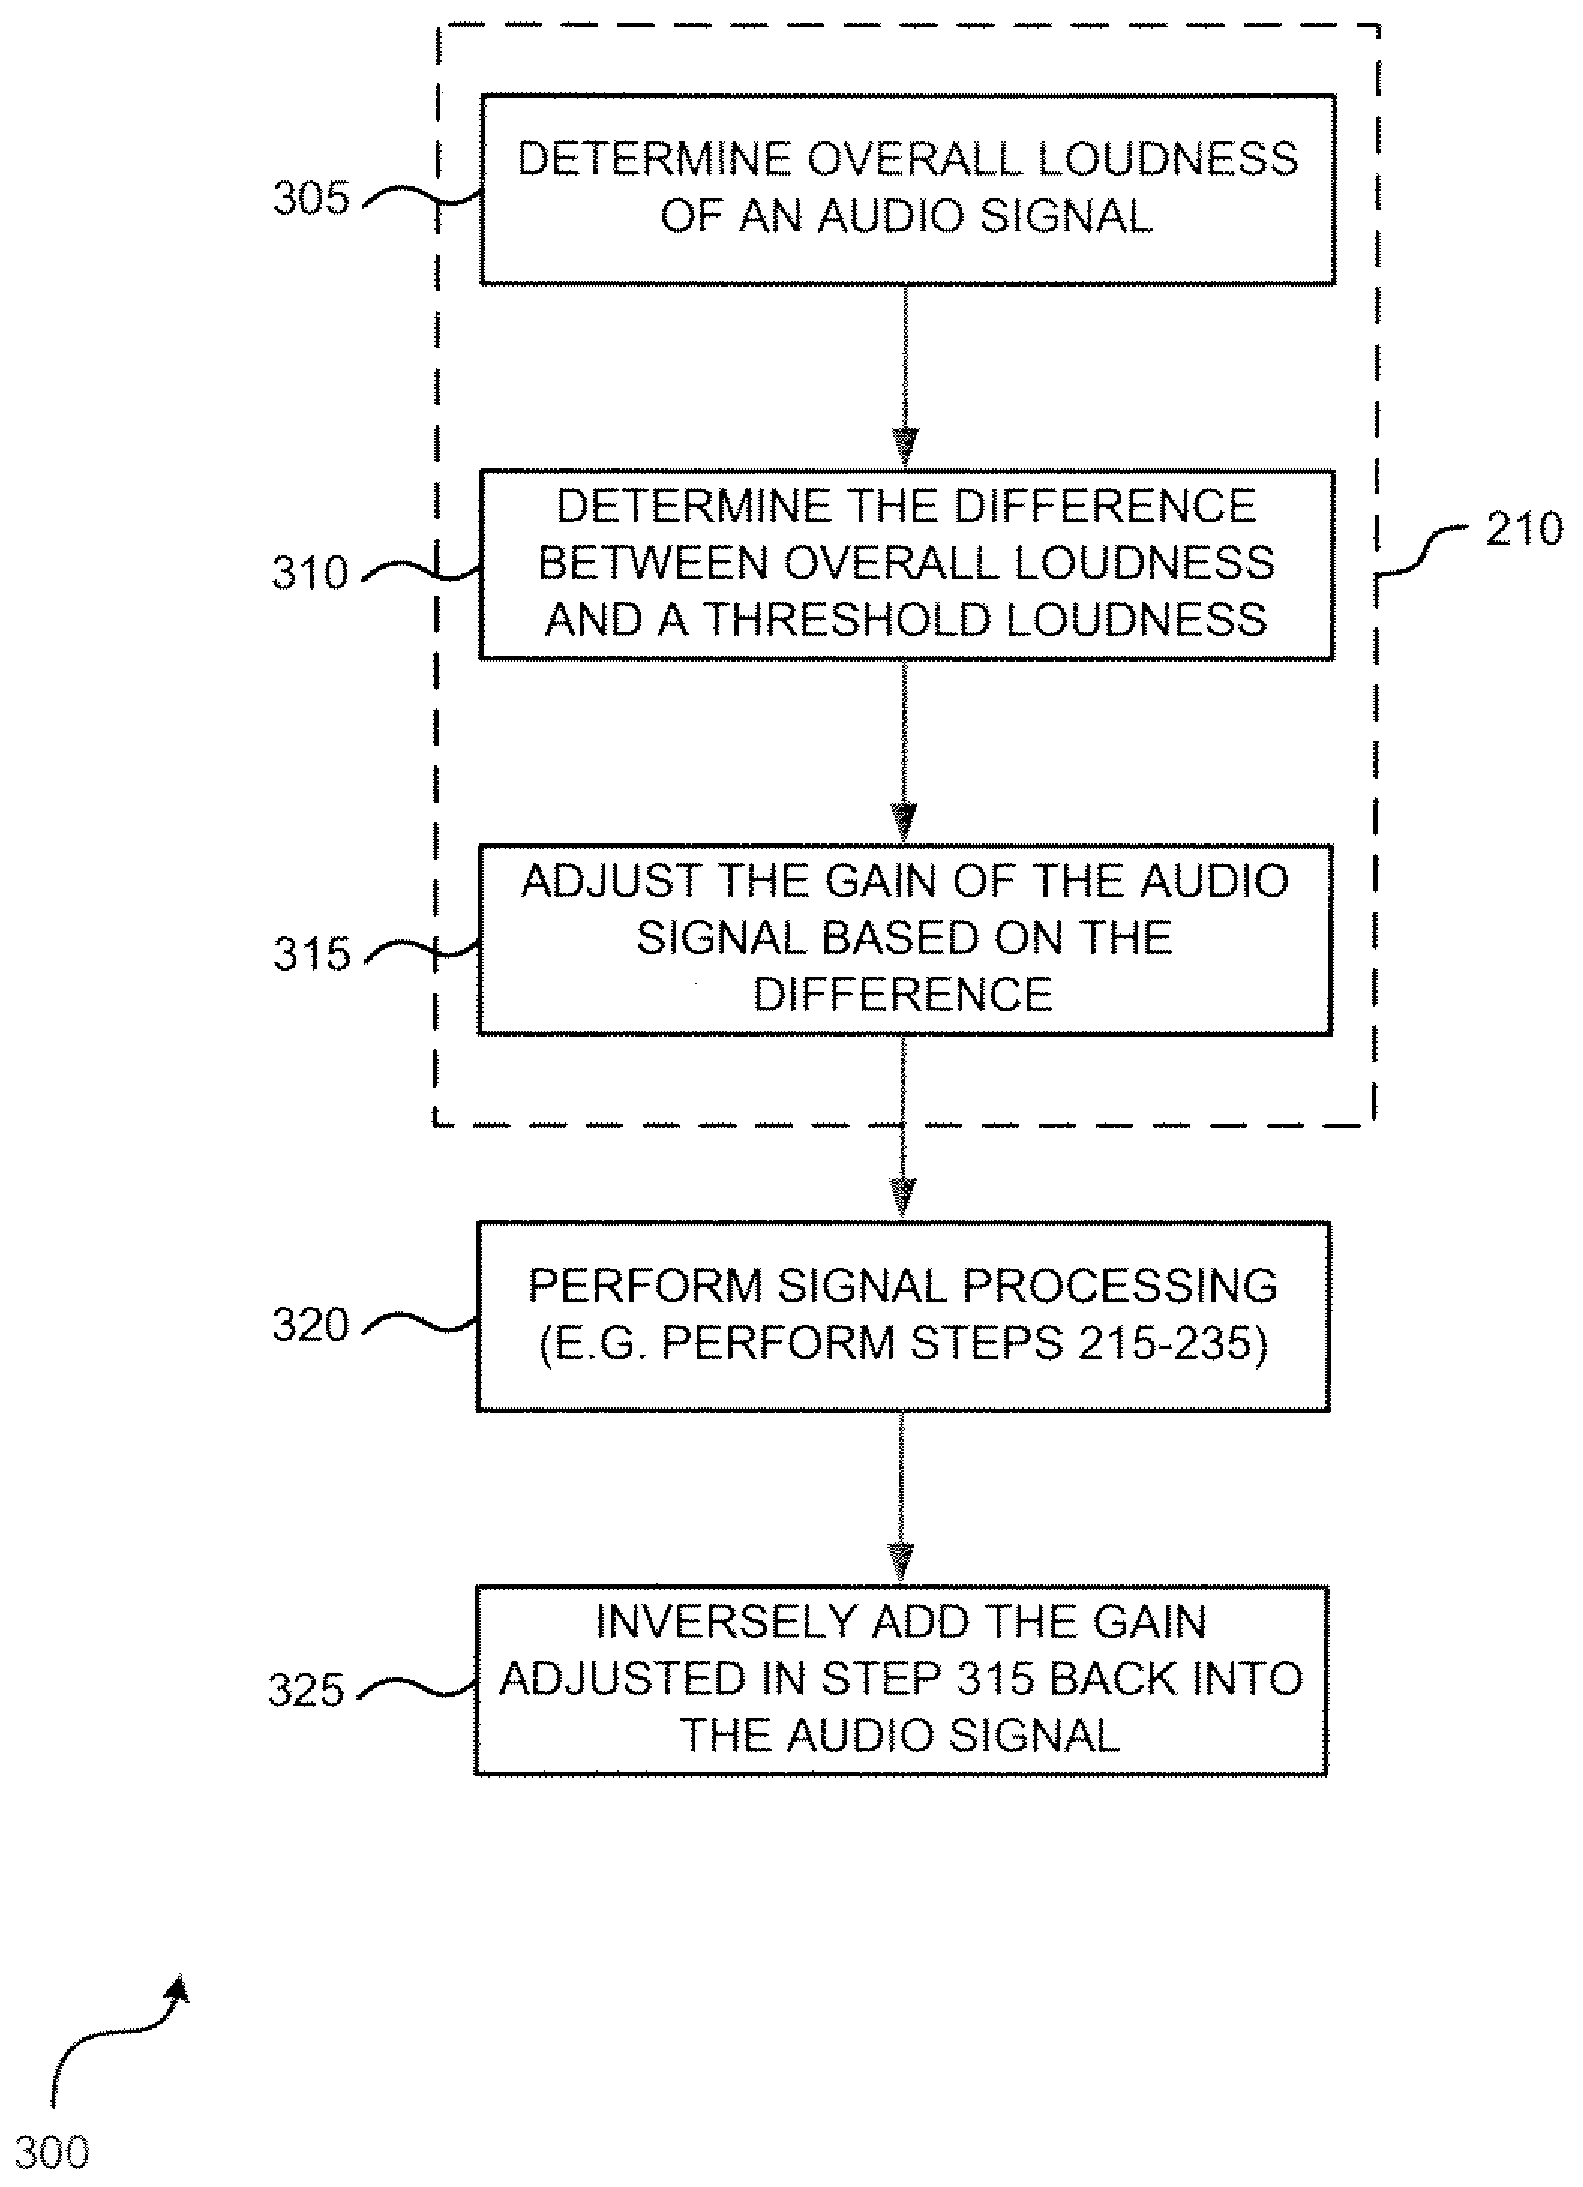 System and method for processing audio signal